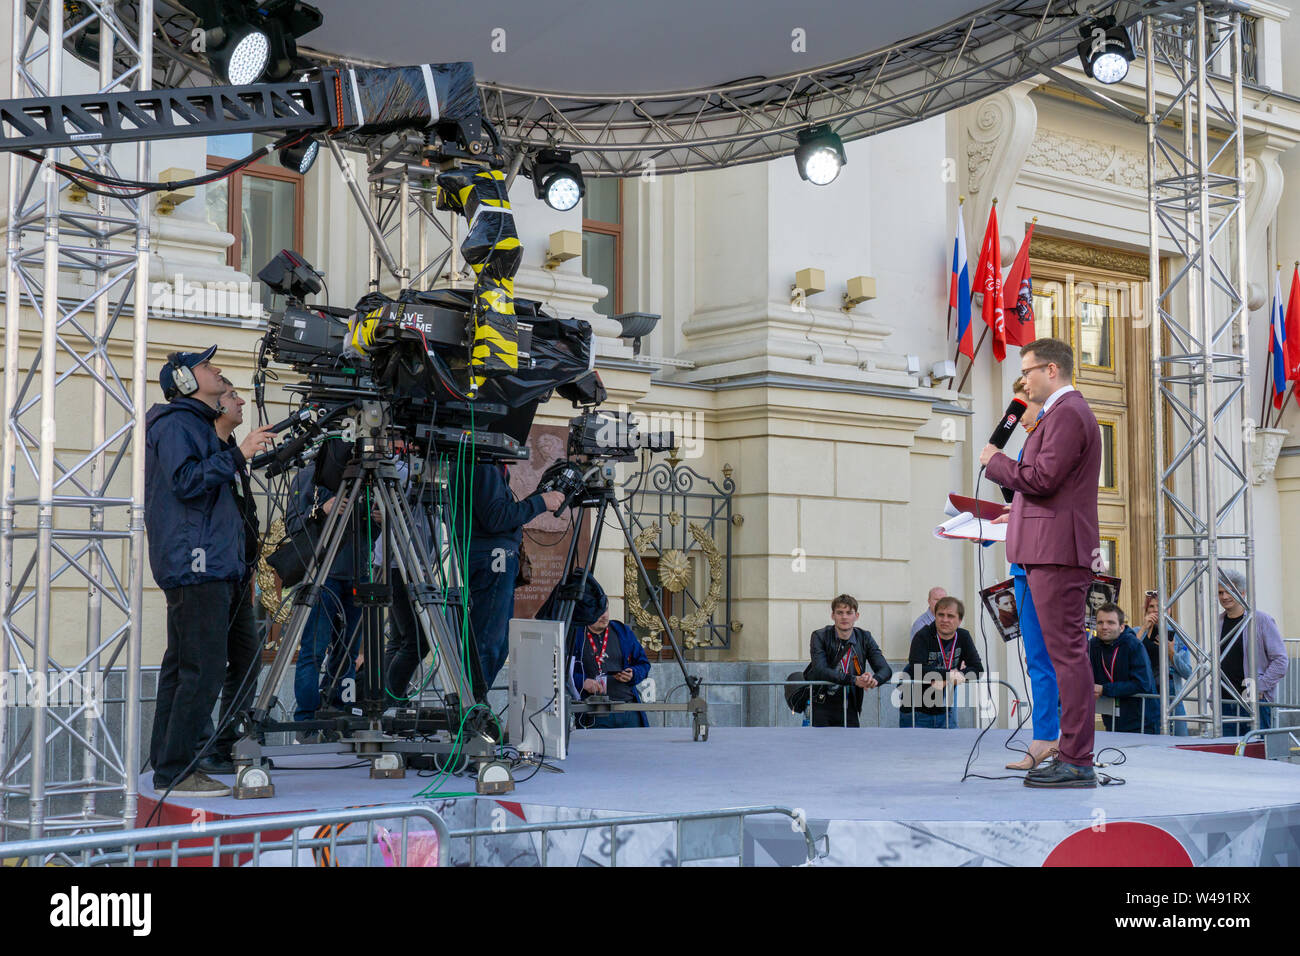 MOSCOW, RUSSIA - MAY 9, 2019: Recording TV program during the Victory Day Parade. TVC channel journalists are interviewing parade participants. Stock Photo